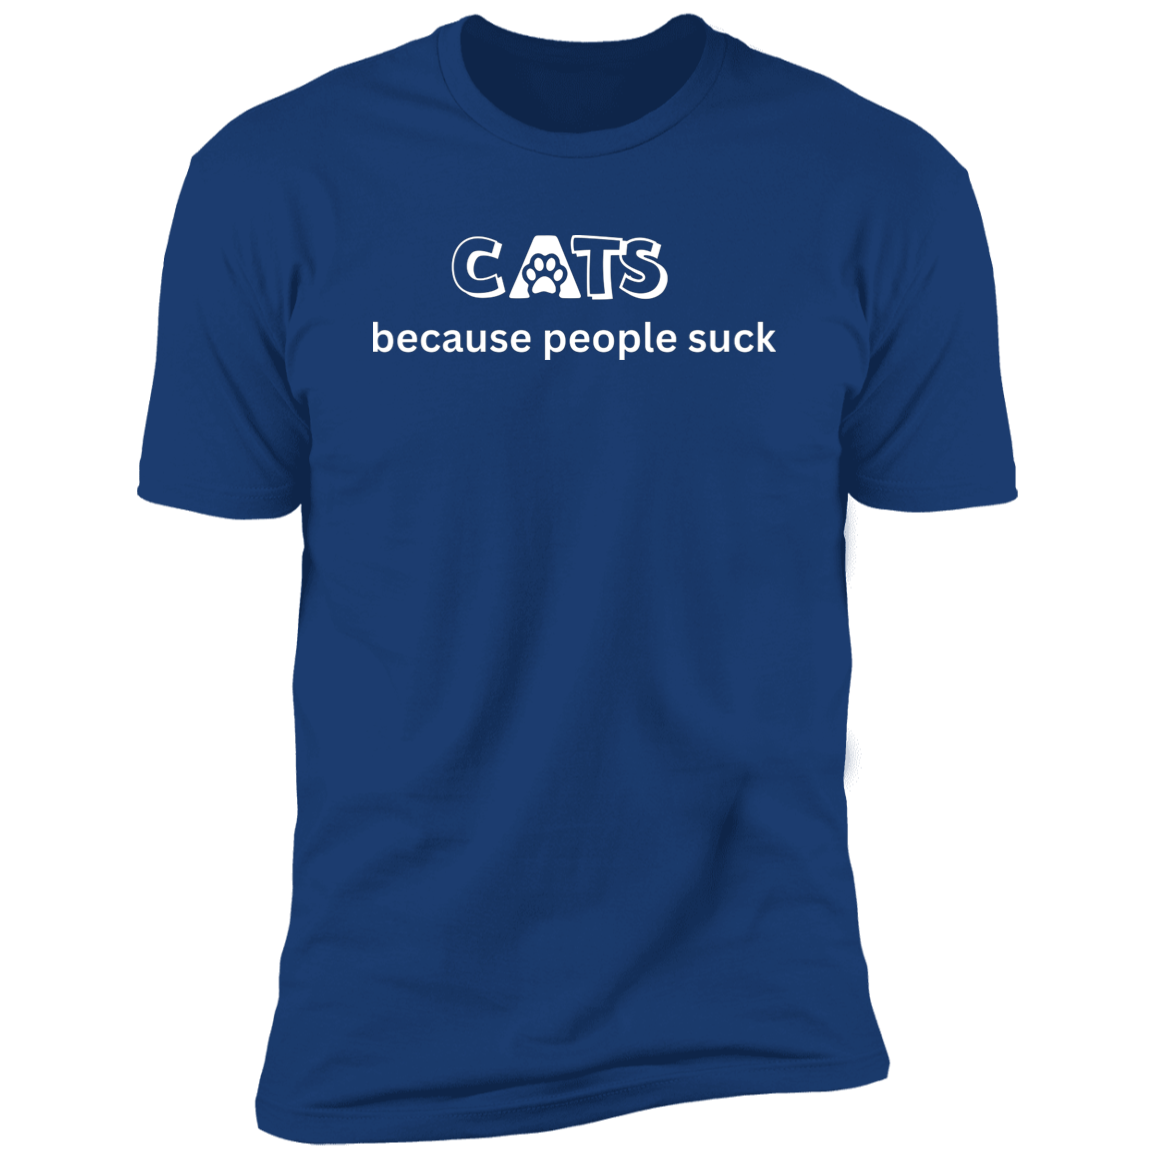 Cats Because People Suck T-shirt, Cat Shirt for humans, in royal blue